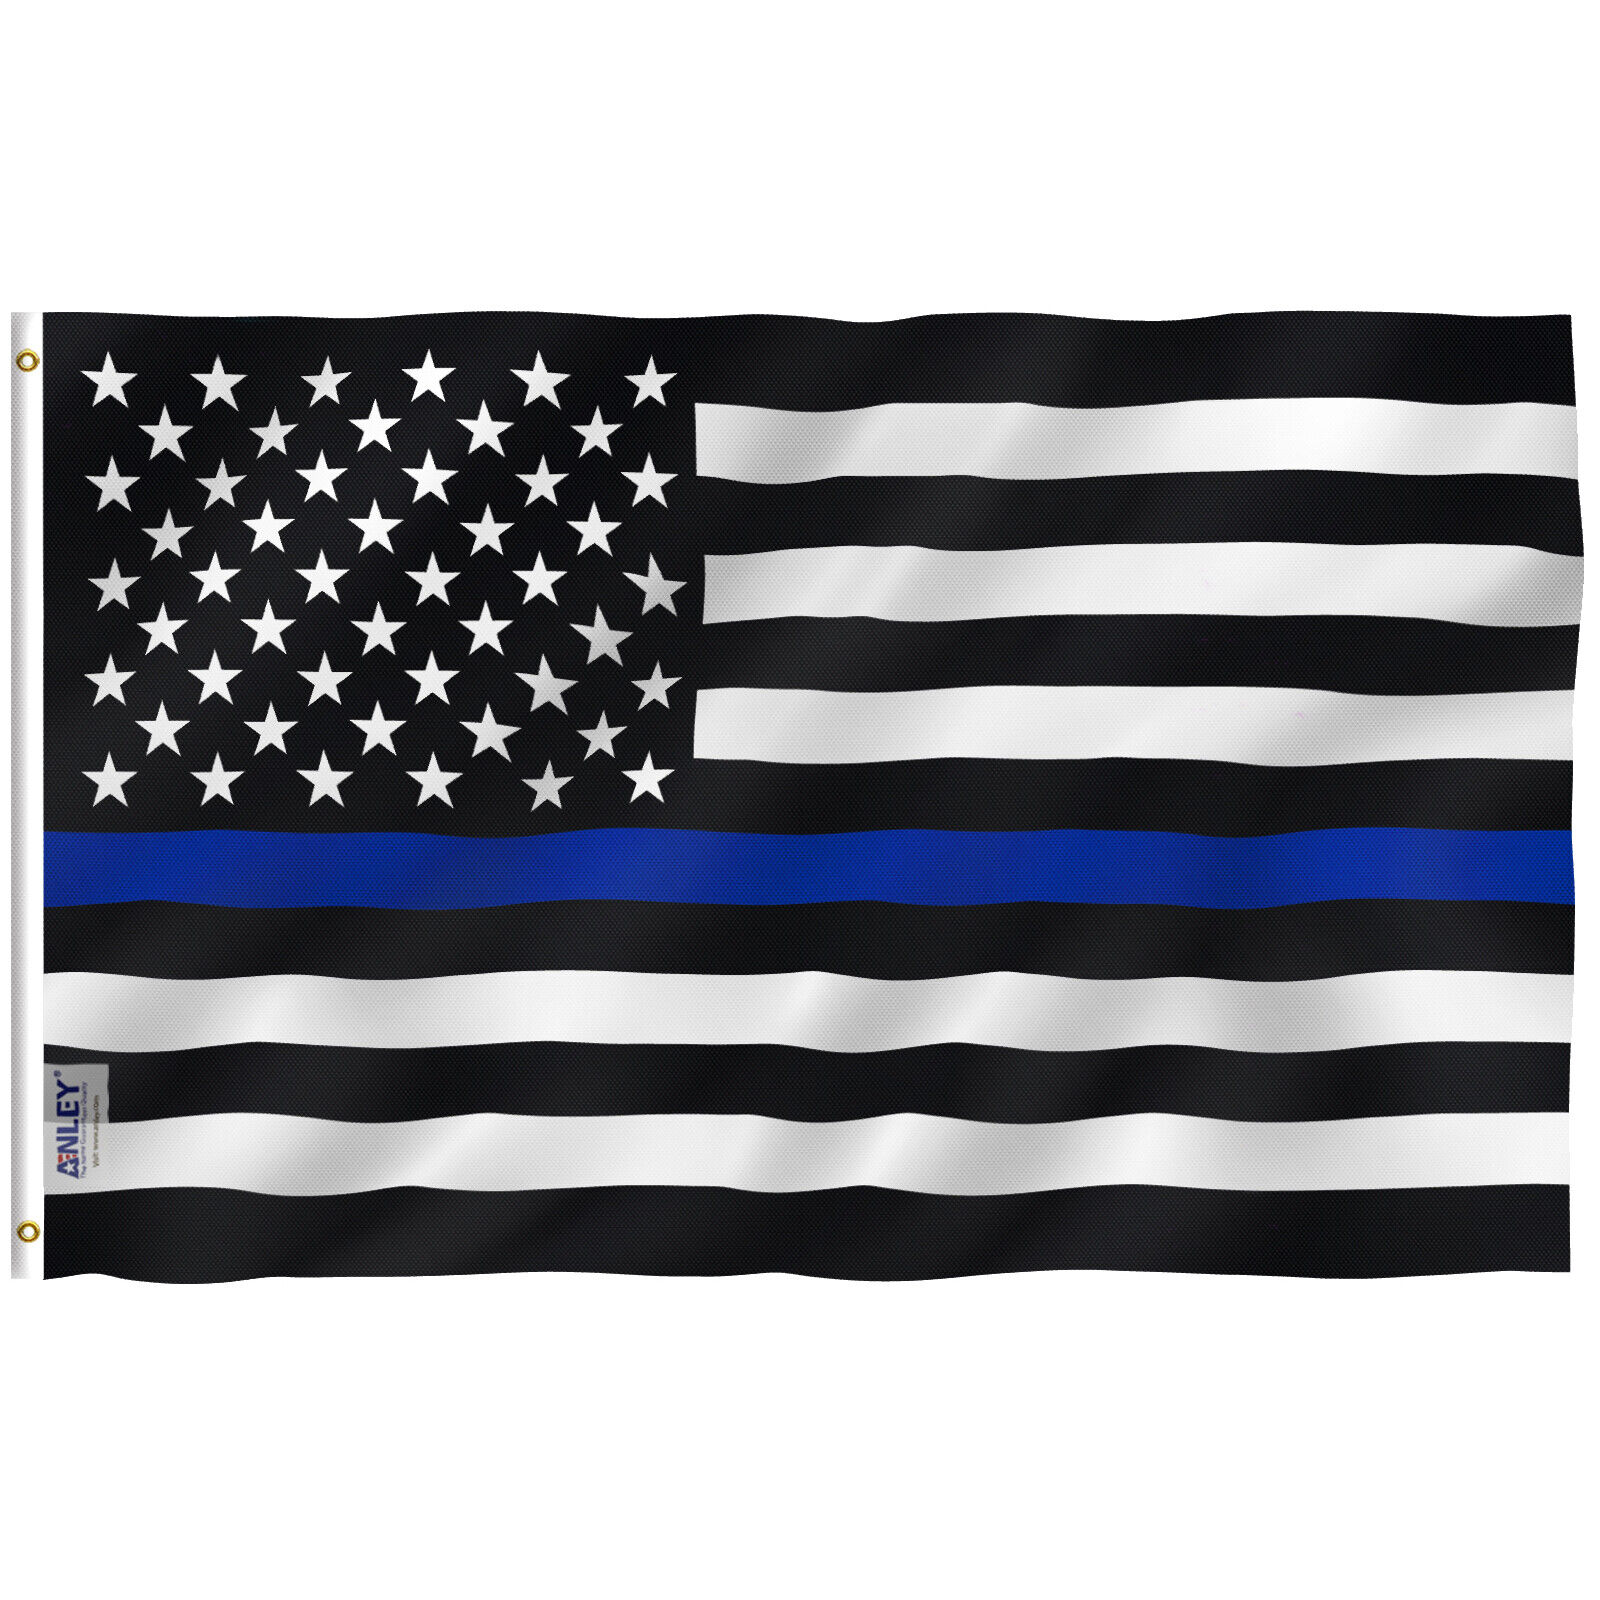 Anley Fly Breeze 3x5 Ft Thin Blue Line USA Flag Law Enforcement Officers Flags